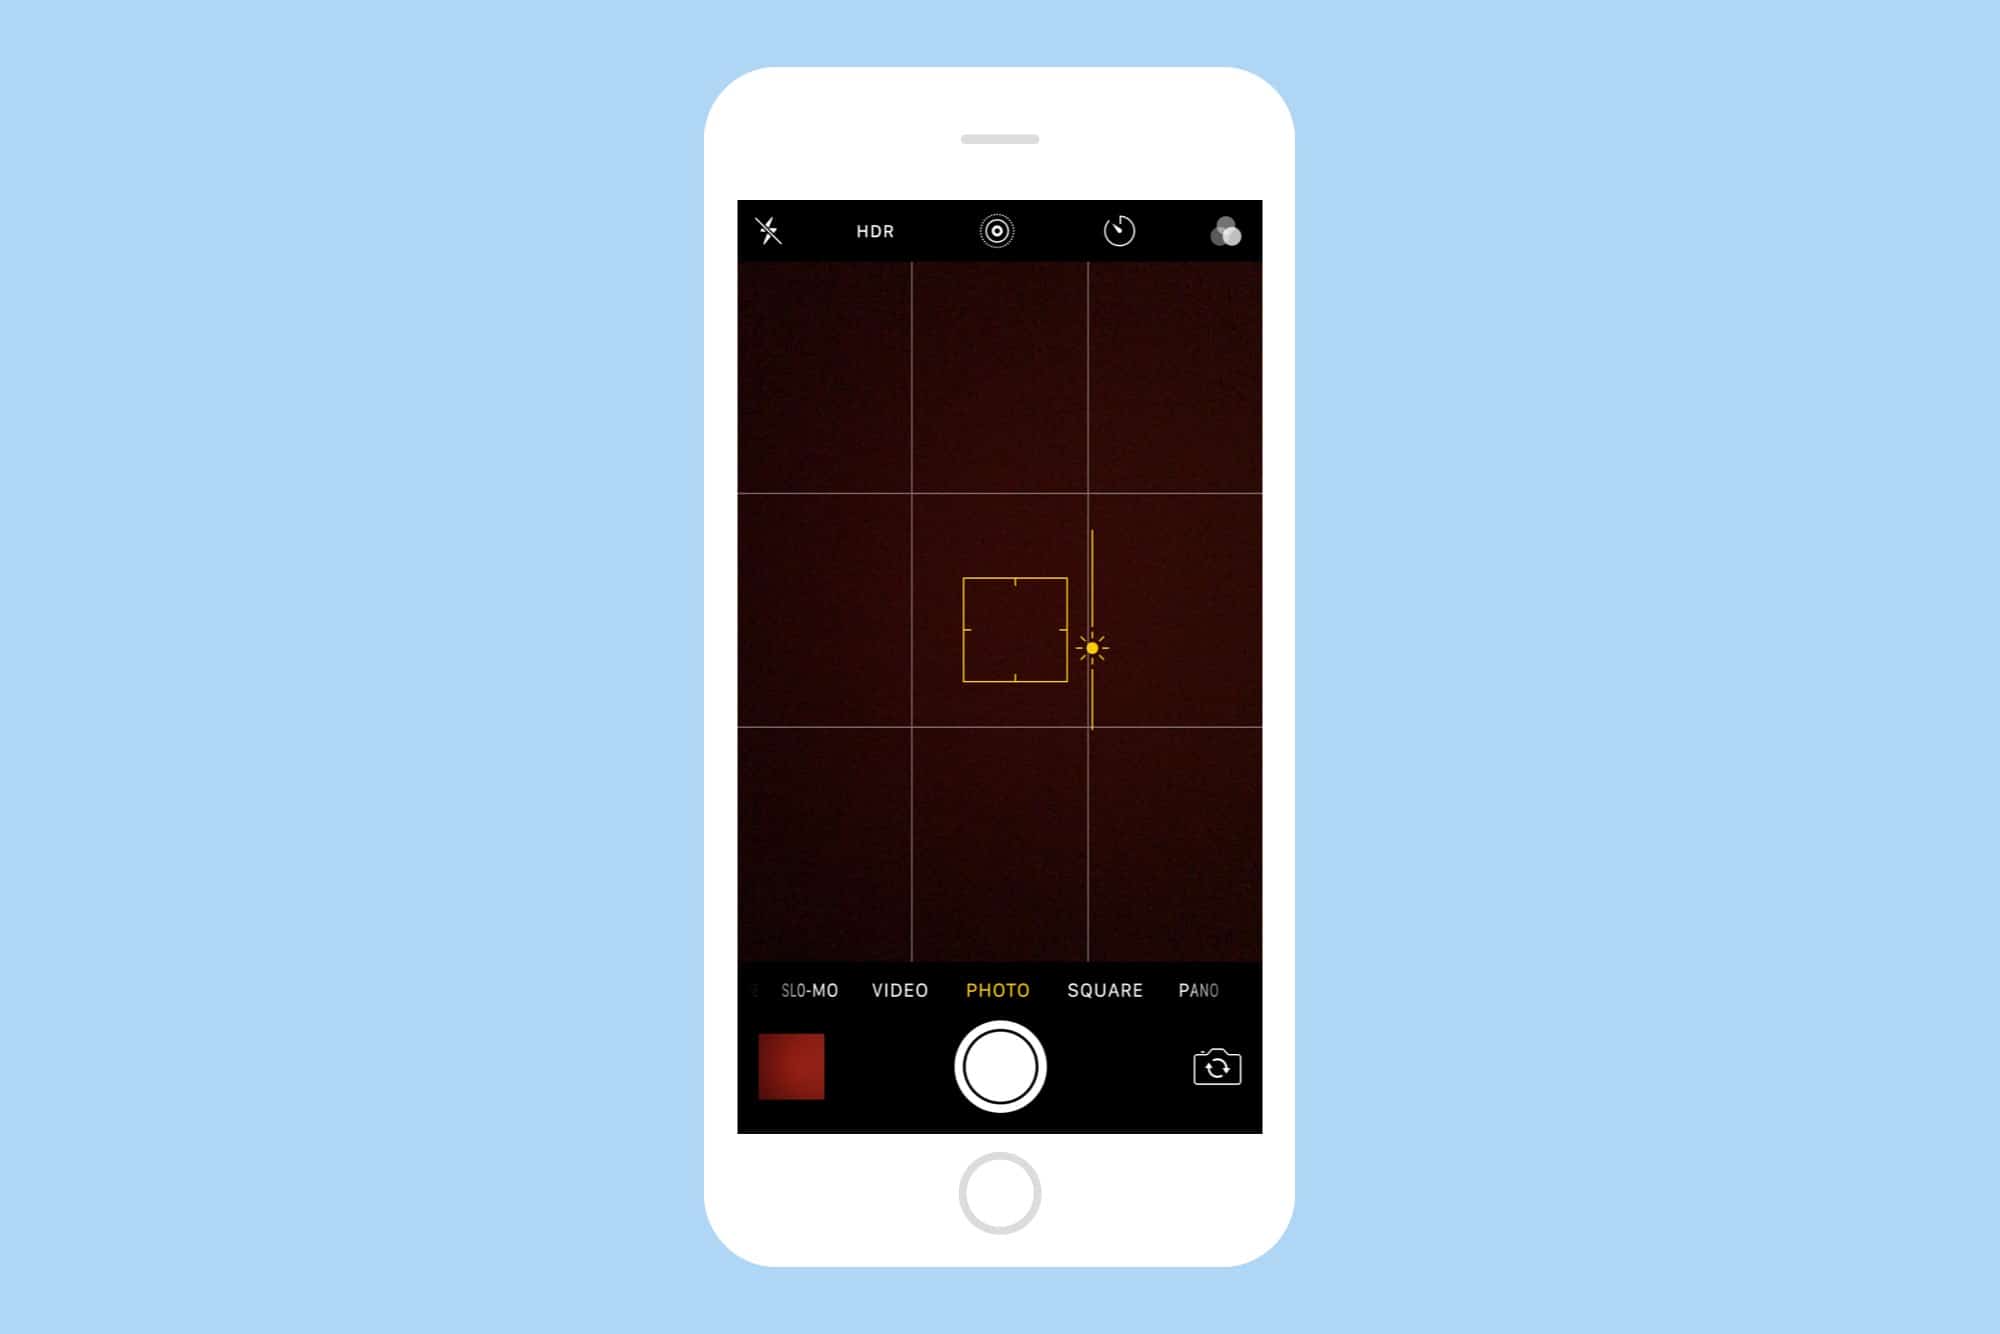 This is the manual exposure control for your iPhone.